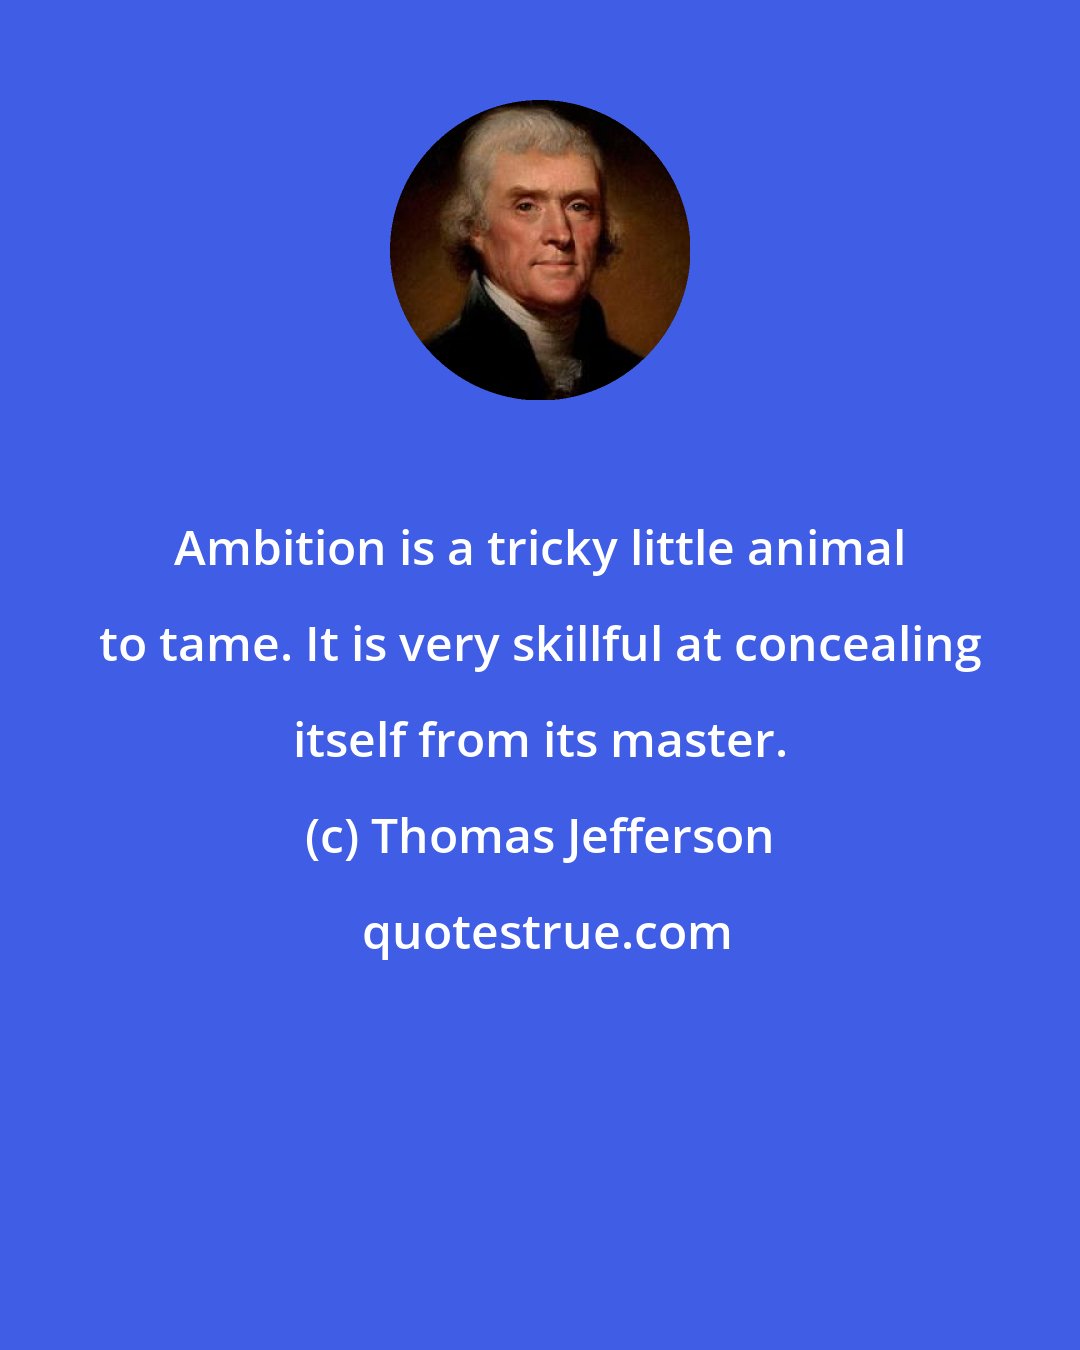 Thomas Jefferson: Ambition is a tricky little animal to tame. It is very skillful at concealing itself from its master.